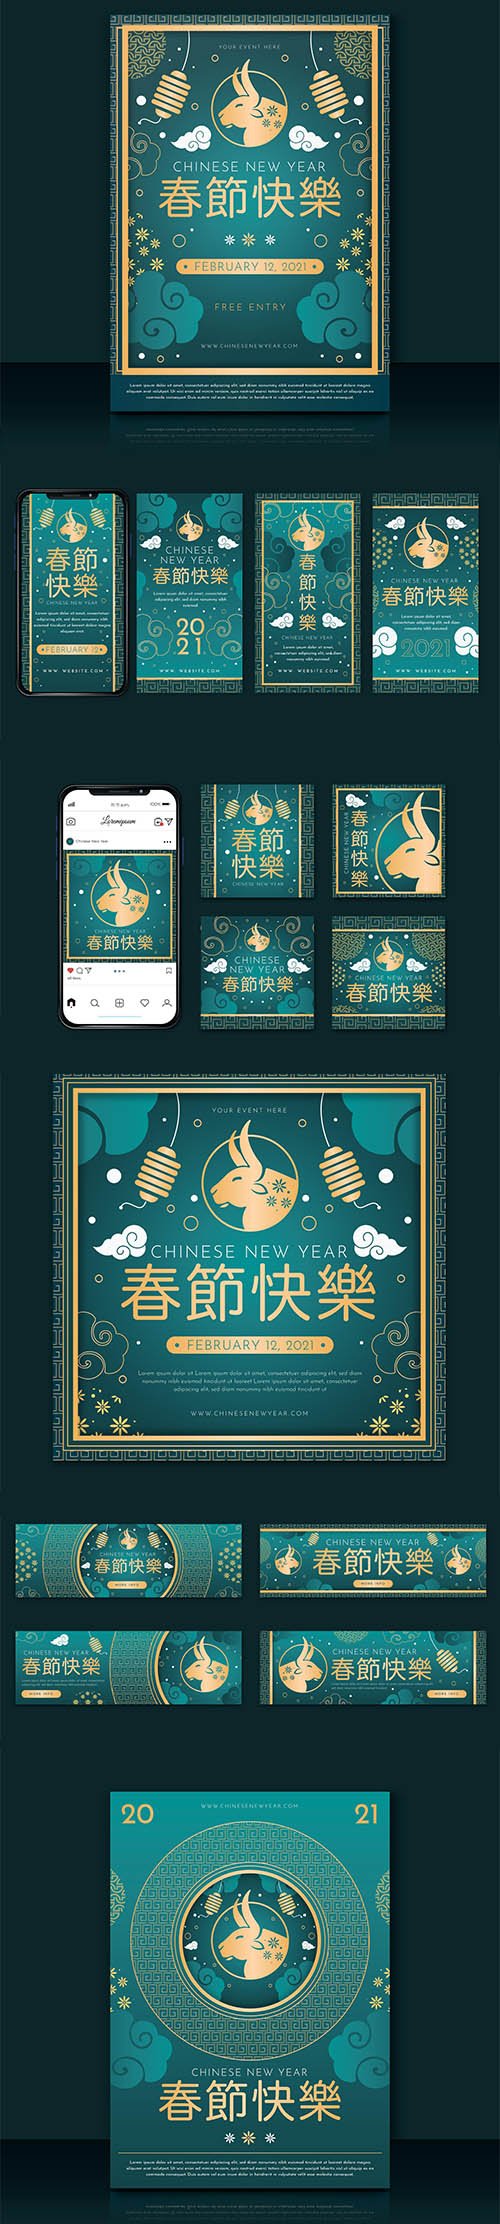 Chinese new year banners template set